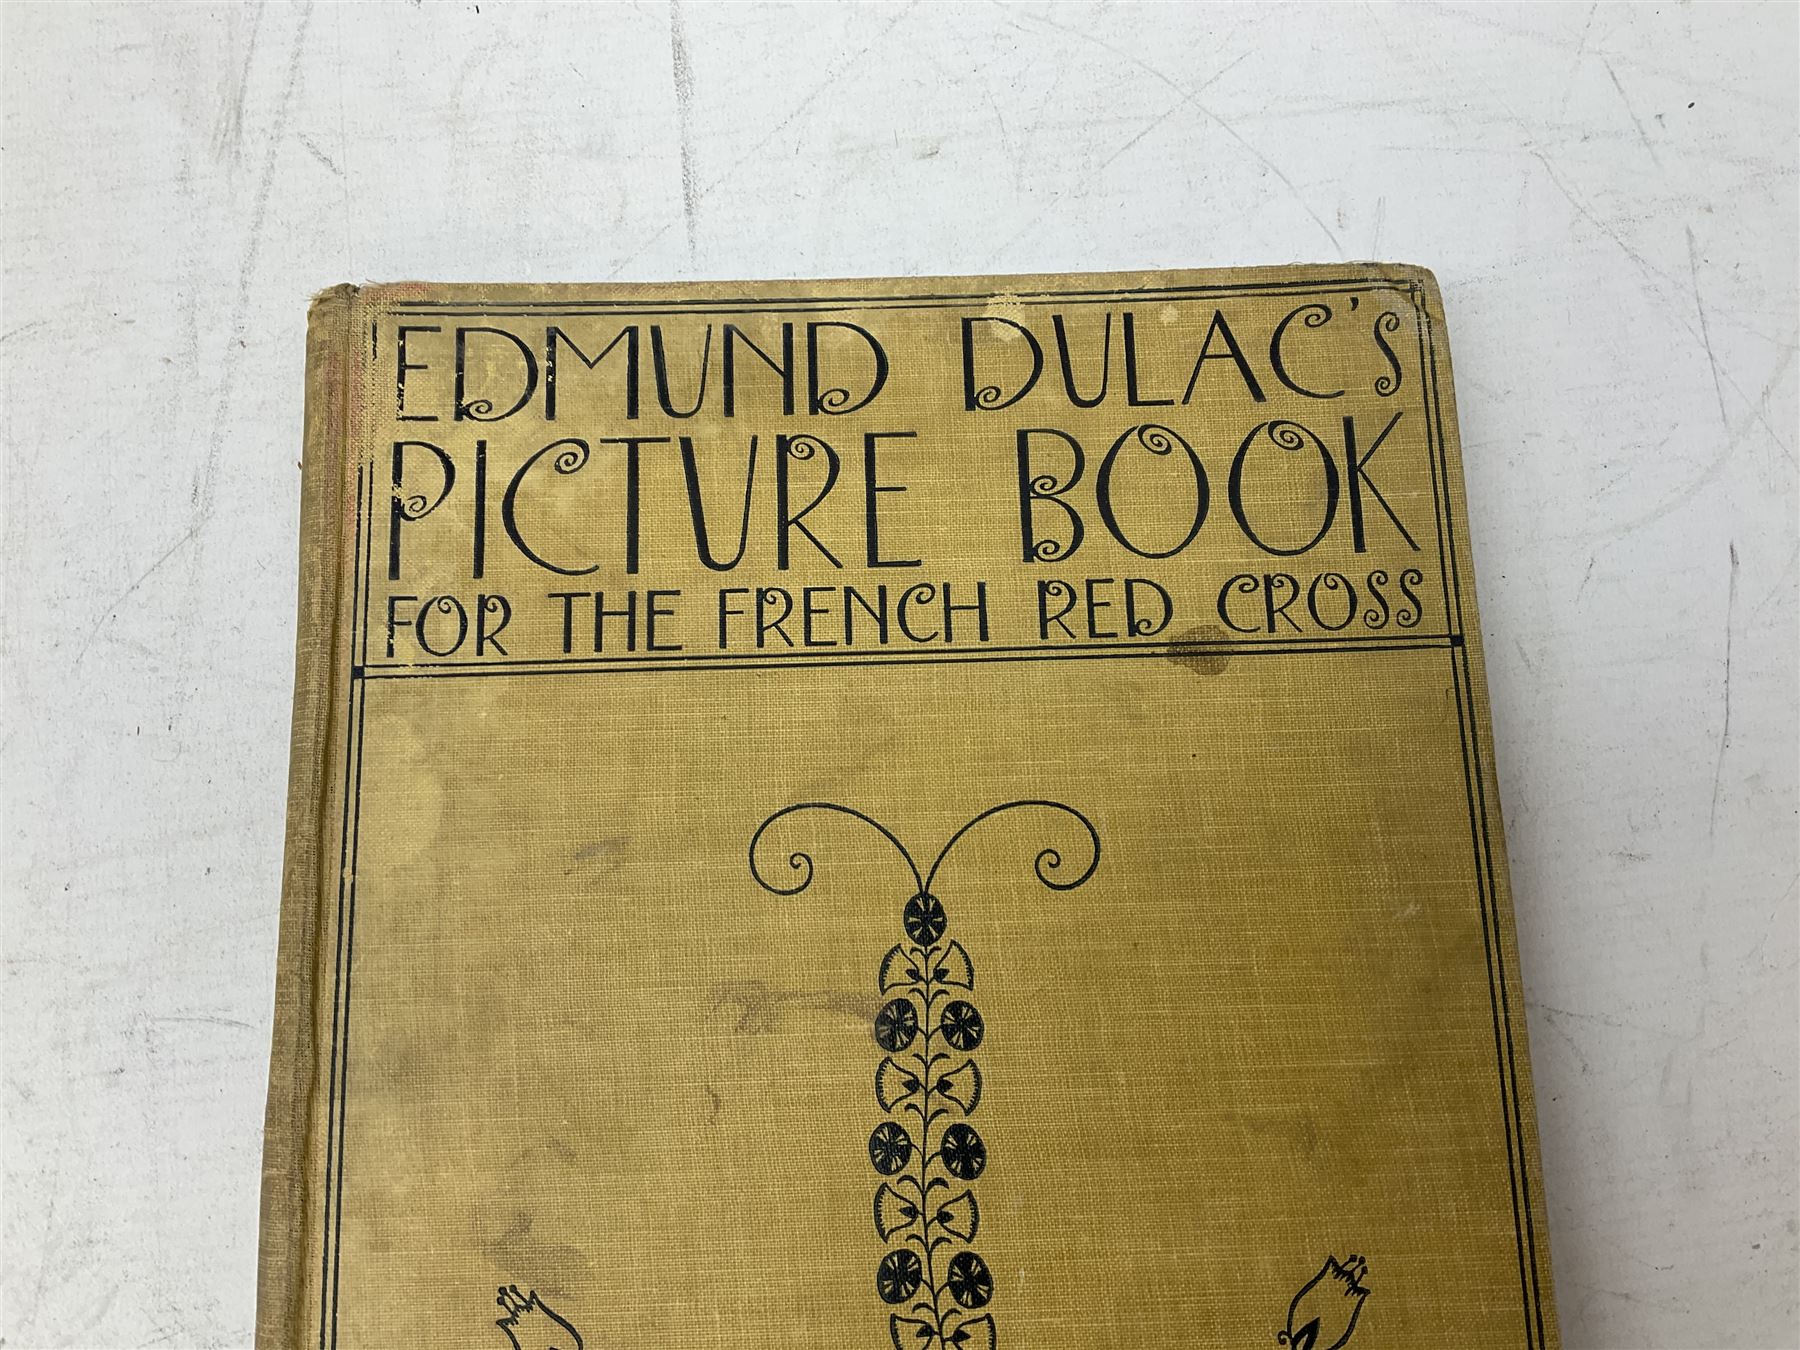 Edmund Dulac's Picture book for the French Red Cross - Image 8 of 11